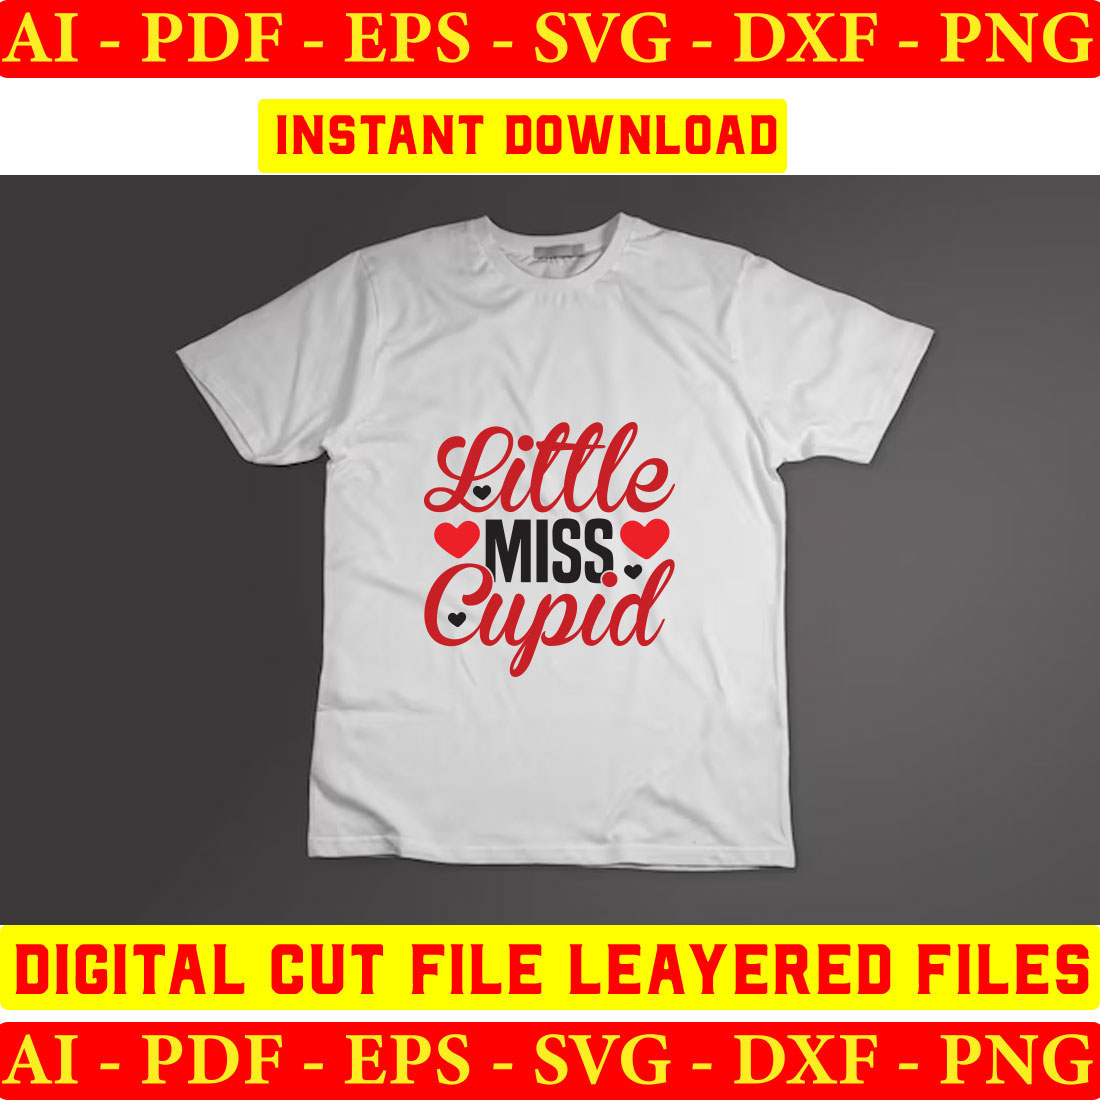 T - shirt with the words little miss cupid on it.